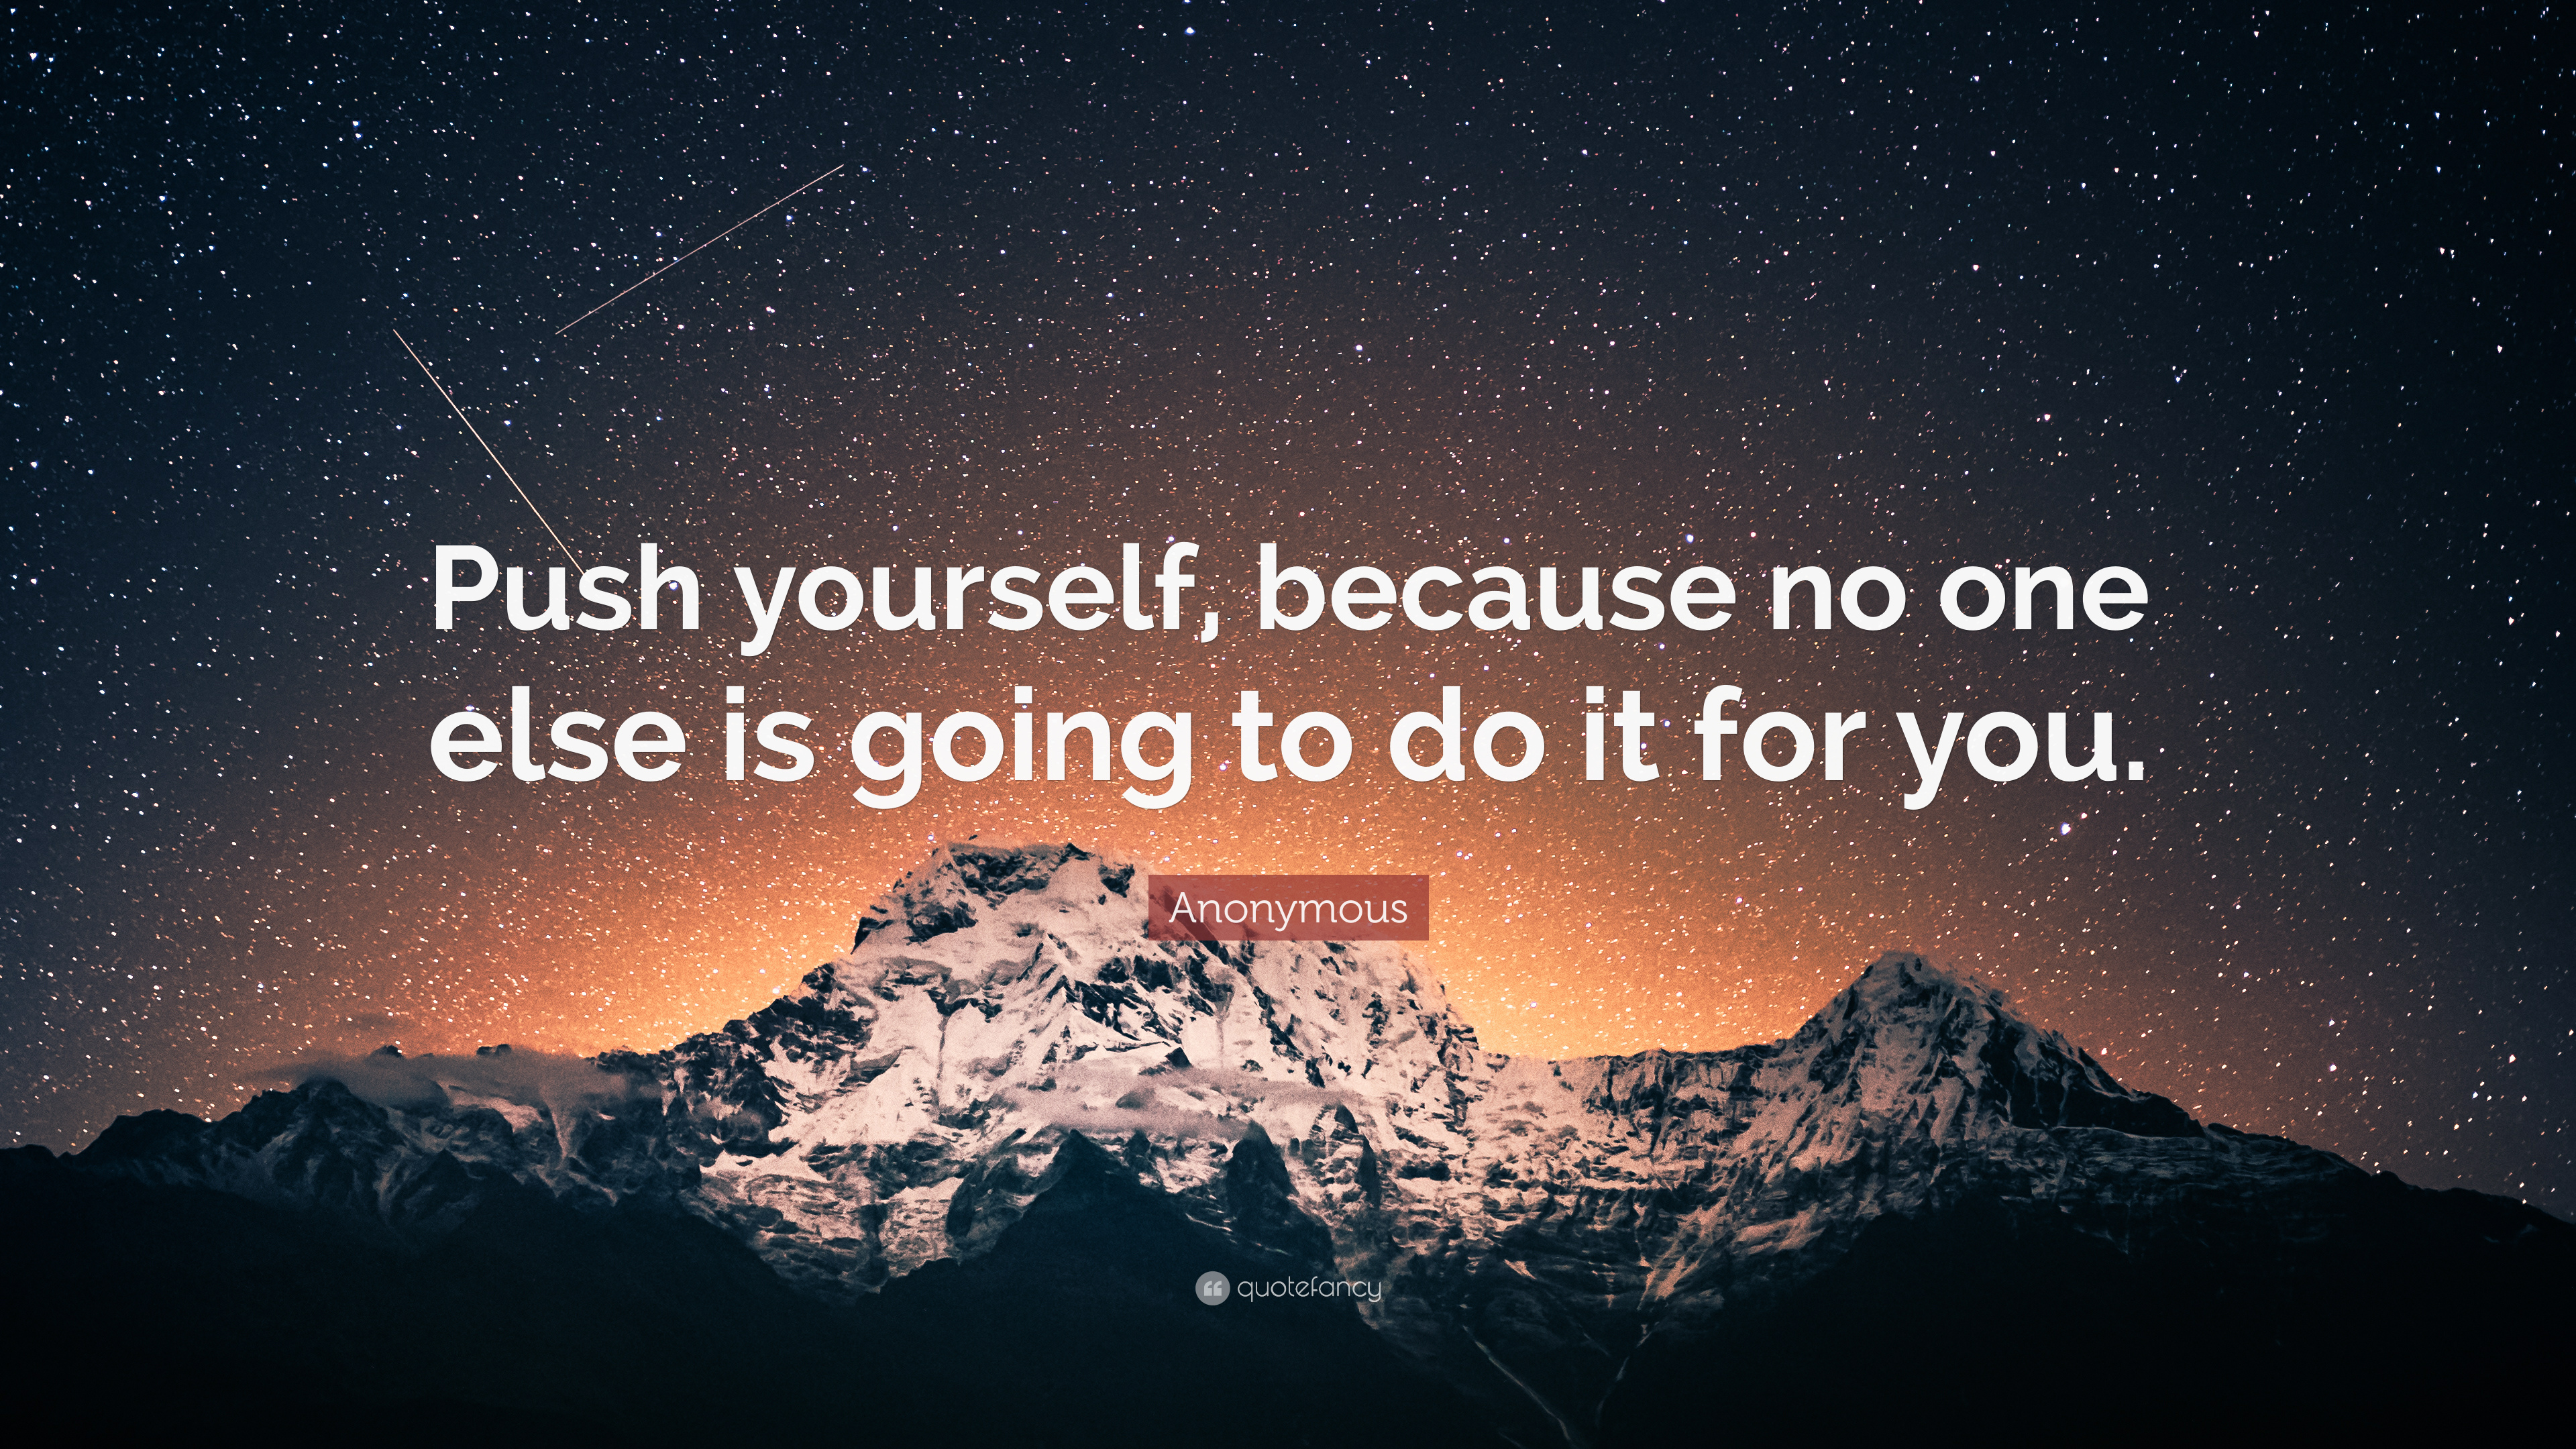 Anonymous Quote: “Push yourself, because no one else is going to do it for you.”